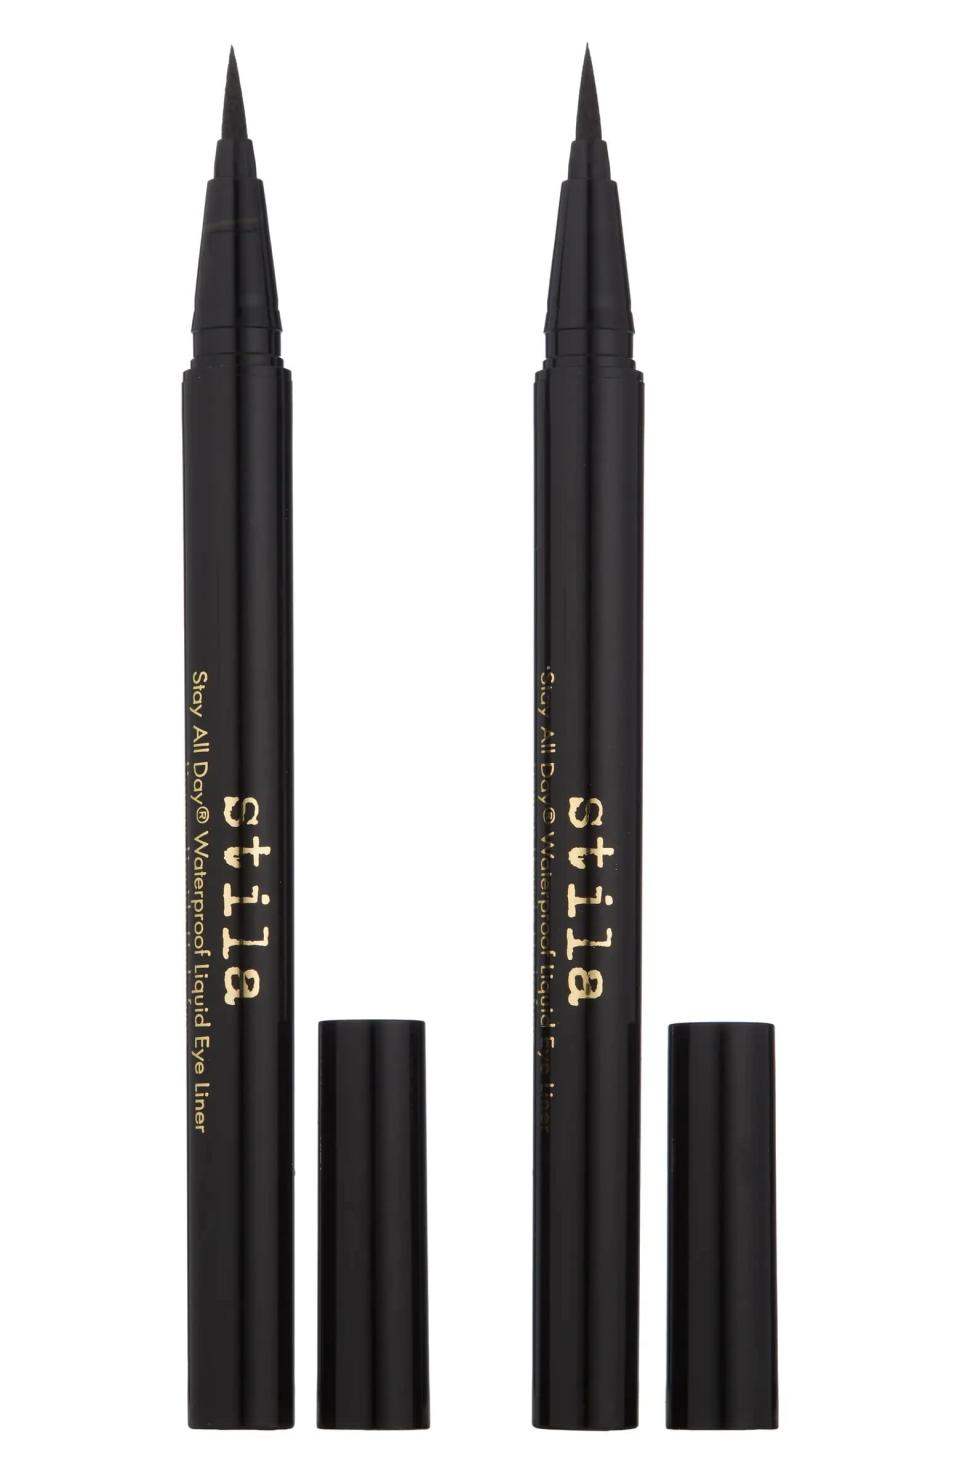 <p>The <span>Stila Two Can Play Waterproof Eye Liner Duo</span> ($32, $44 value) will give you the sharpest wing with the easiest control. The duo has two full sizes of the cult-favorite eyeliner, so you won't need to stock up for a while. The formula doesn't bleed, smudge, or run, even when you cry. Plus, the felt-tip applicator is perfect for precision and drawing the sharpest wing. </p>